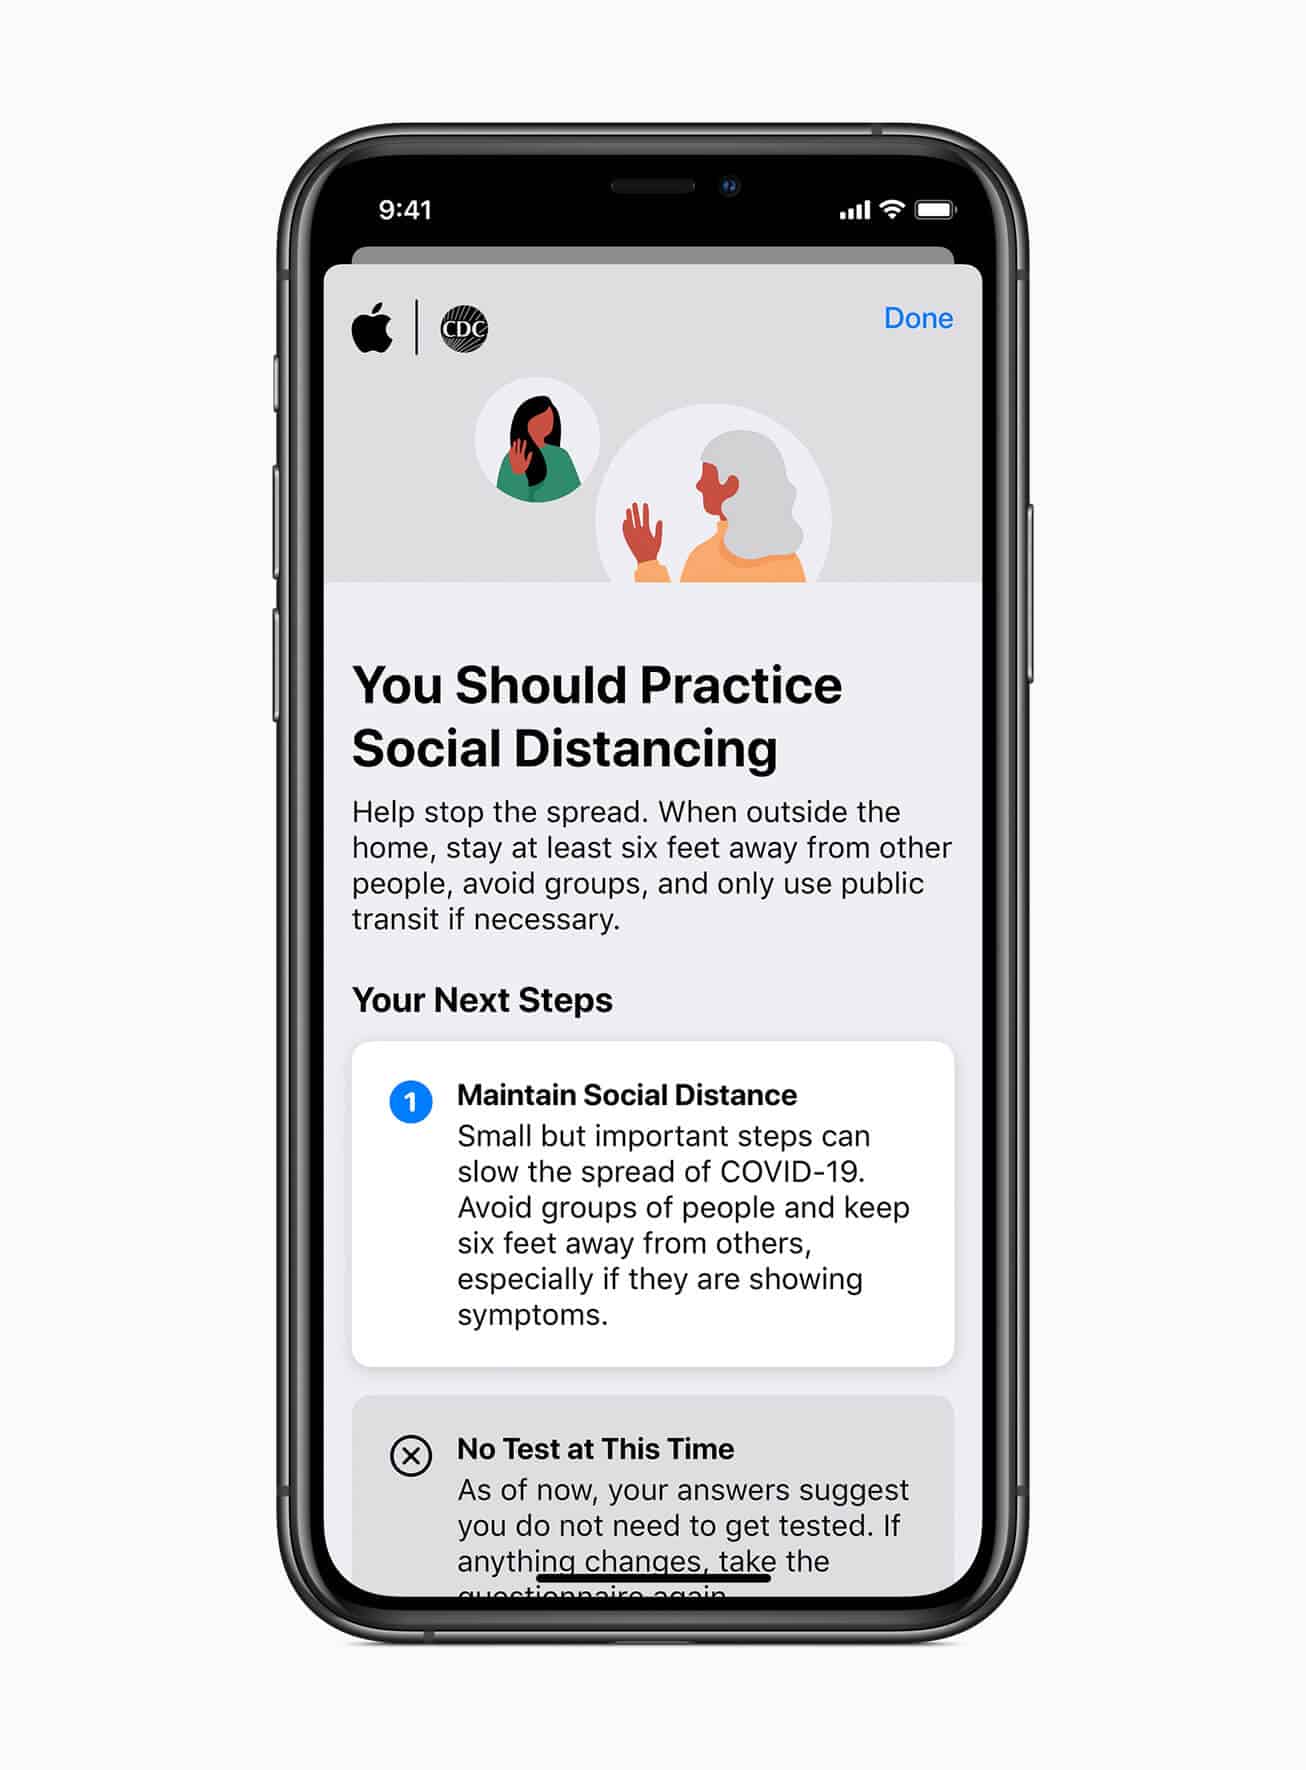 Apple launches Covid-19 screening iPhone app and website 1